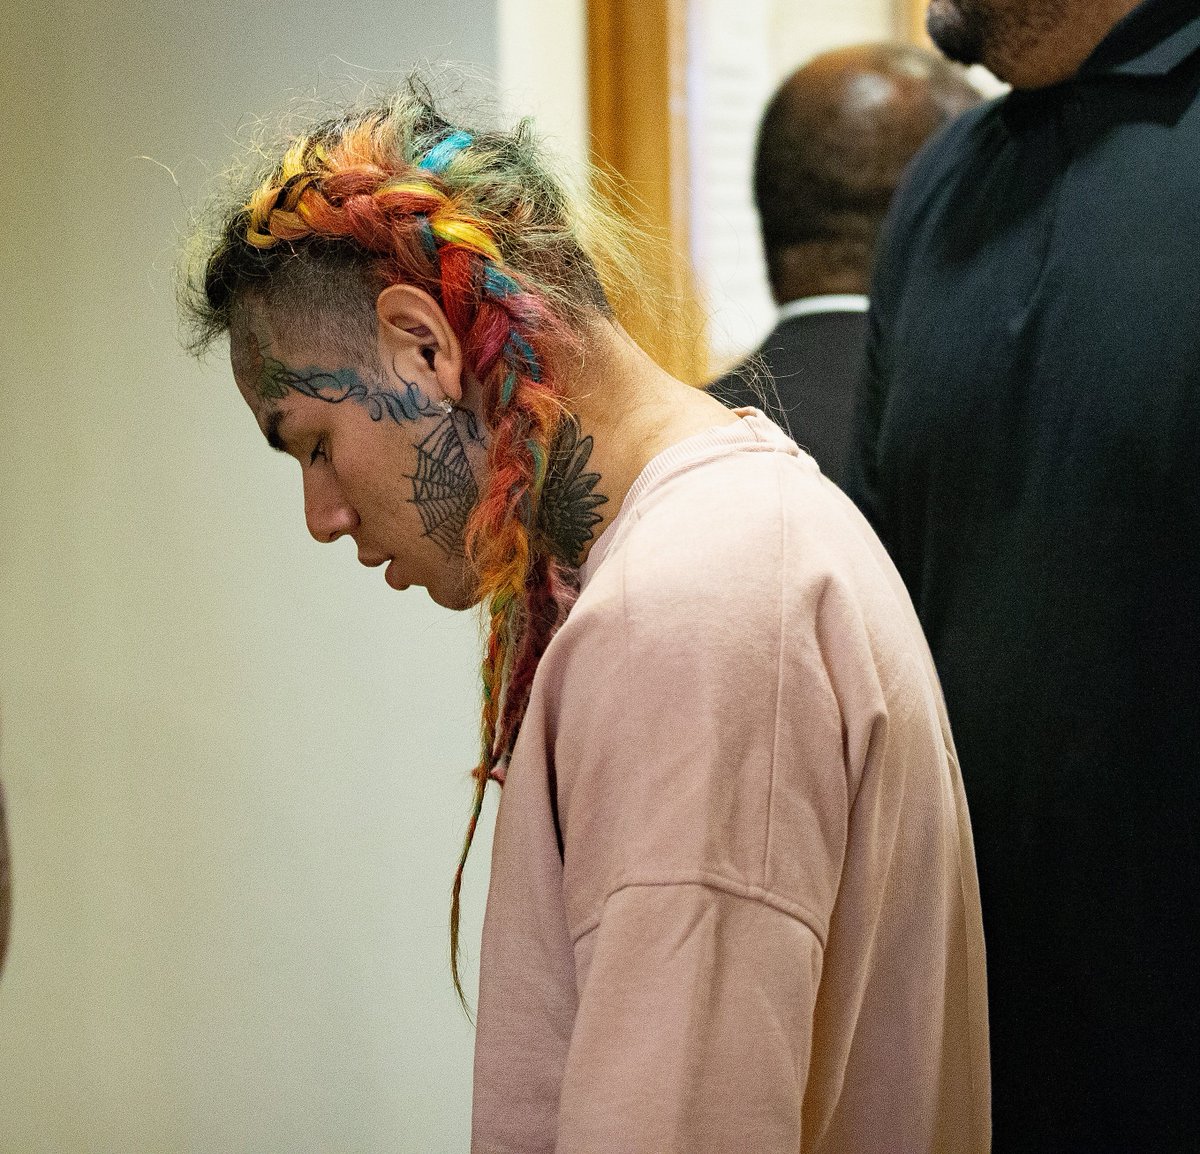 Complex On Twitter 6ix9ine Confirmed His Gummo Track Was Aimed